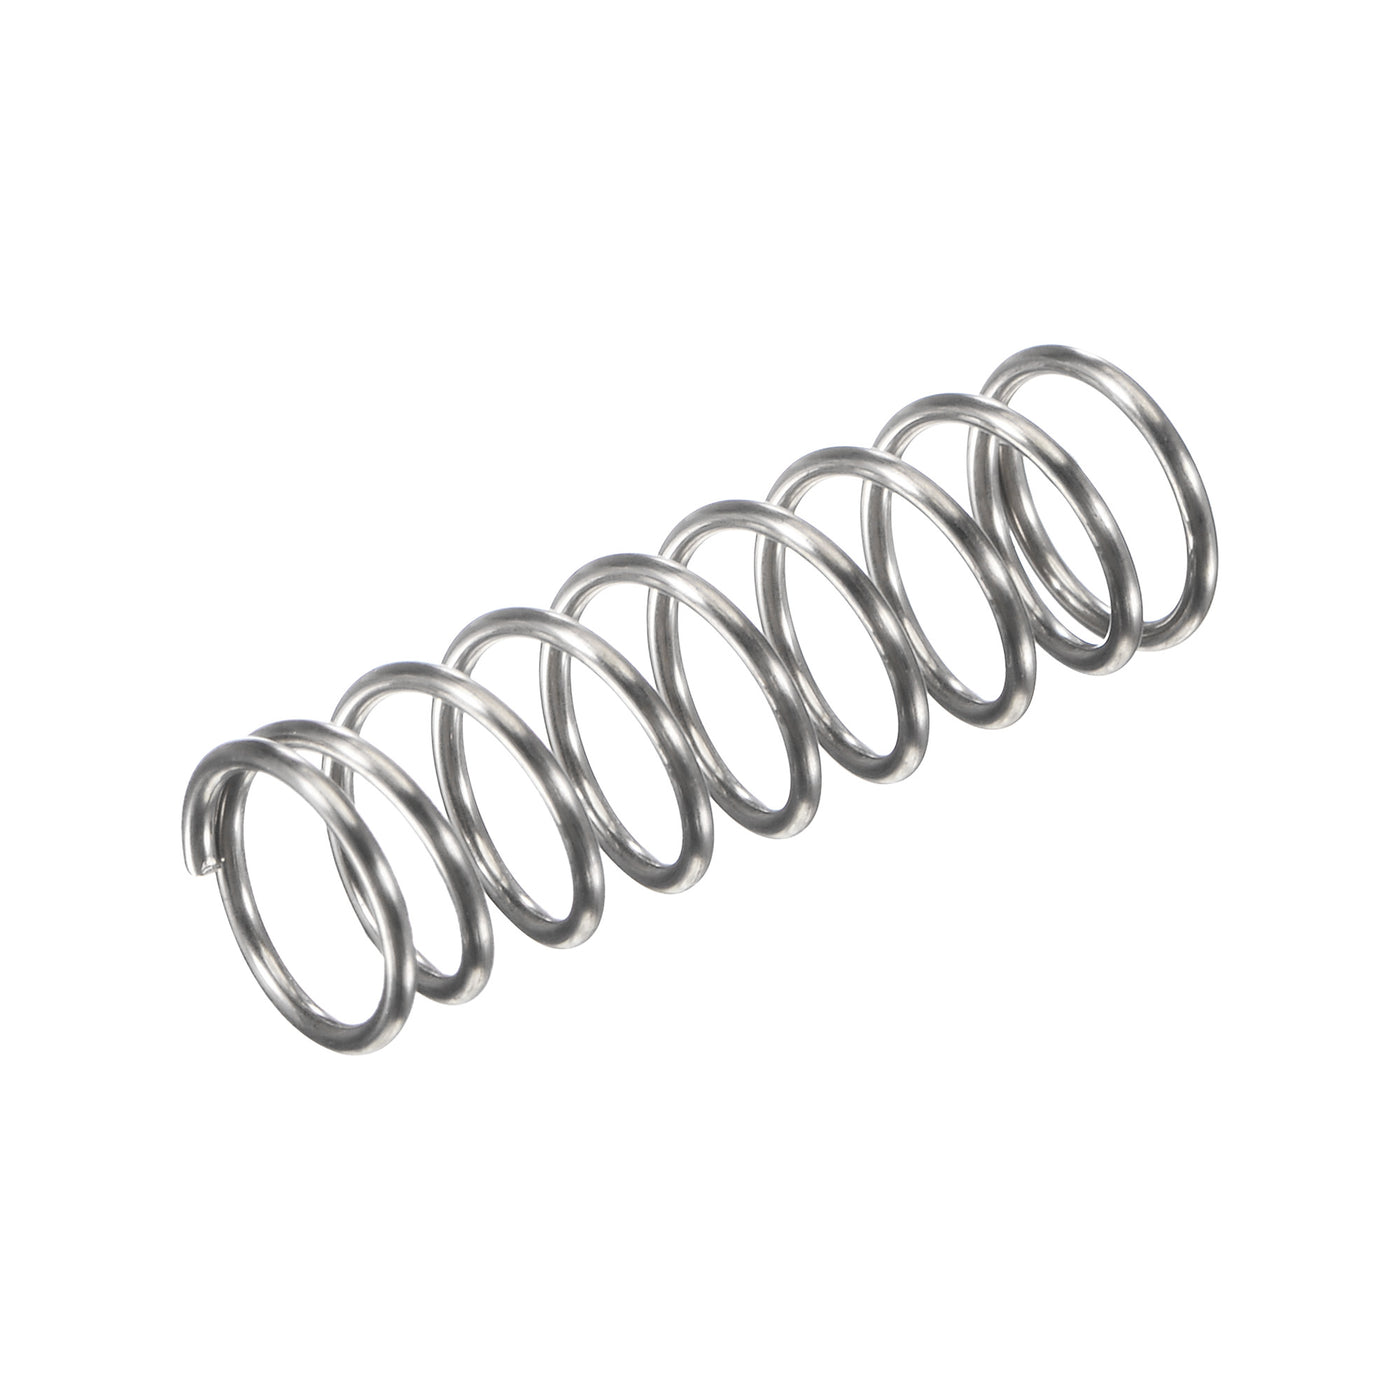 uxcell Uxcell 8mmx0.8mmx25mm 304 Stainless Steel Compression Spring 11.8N Load Capacity 30pcs